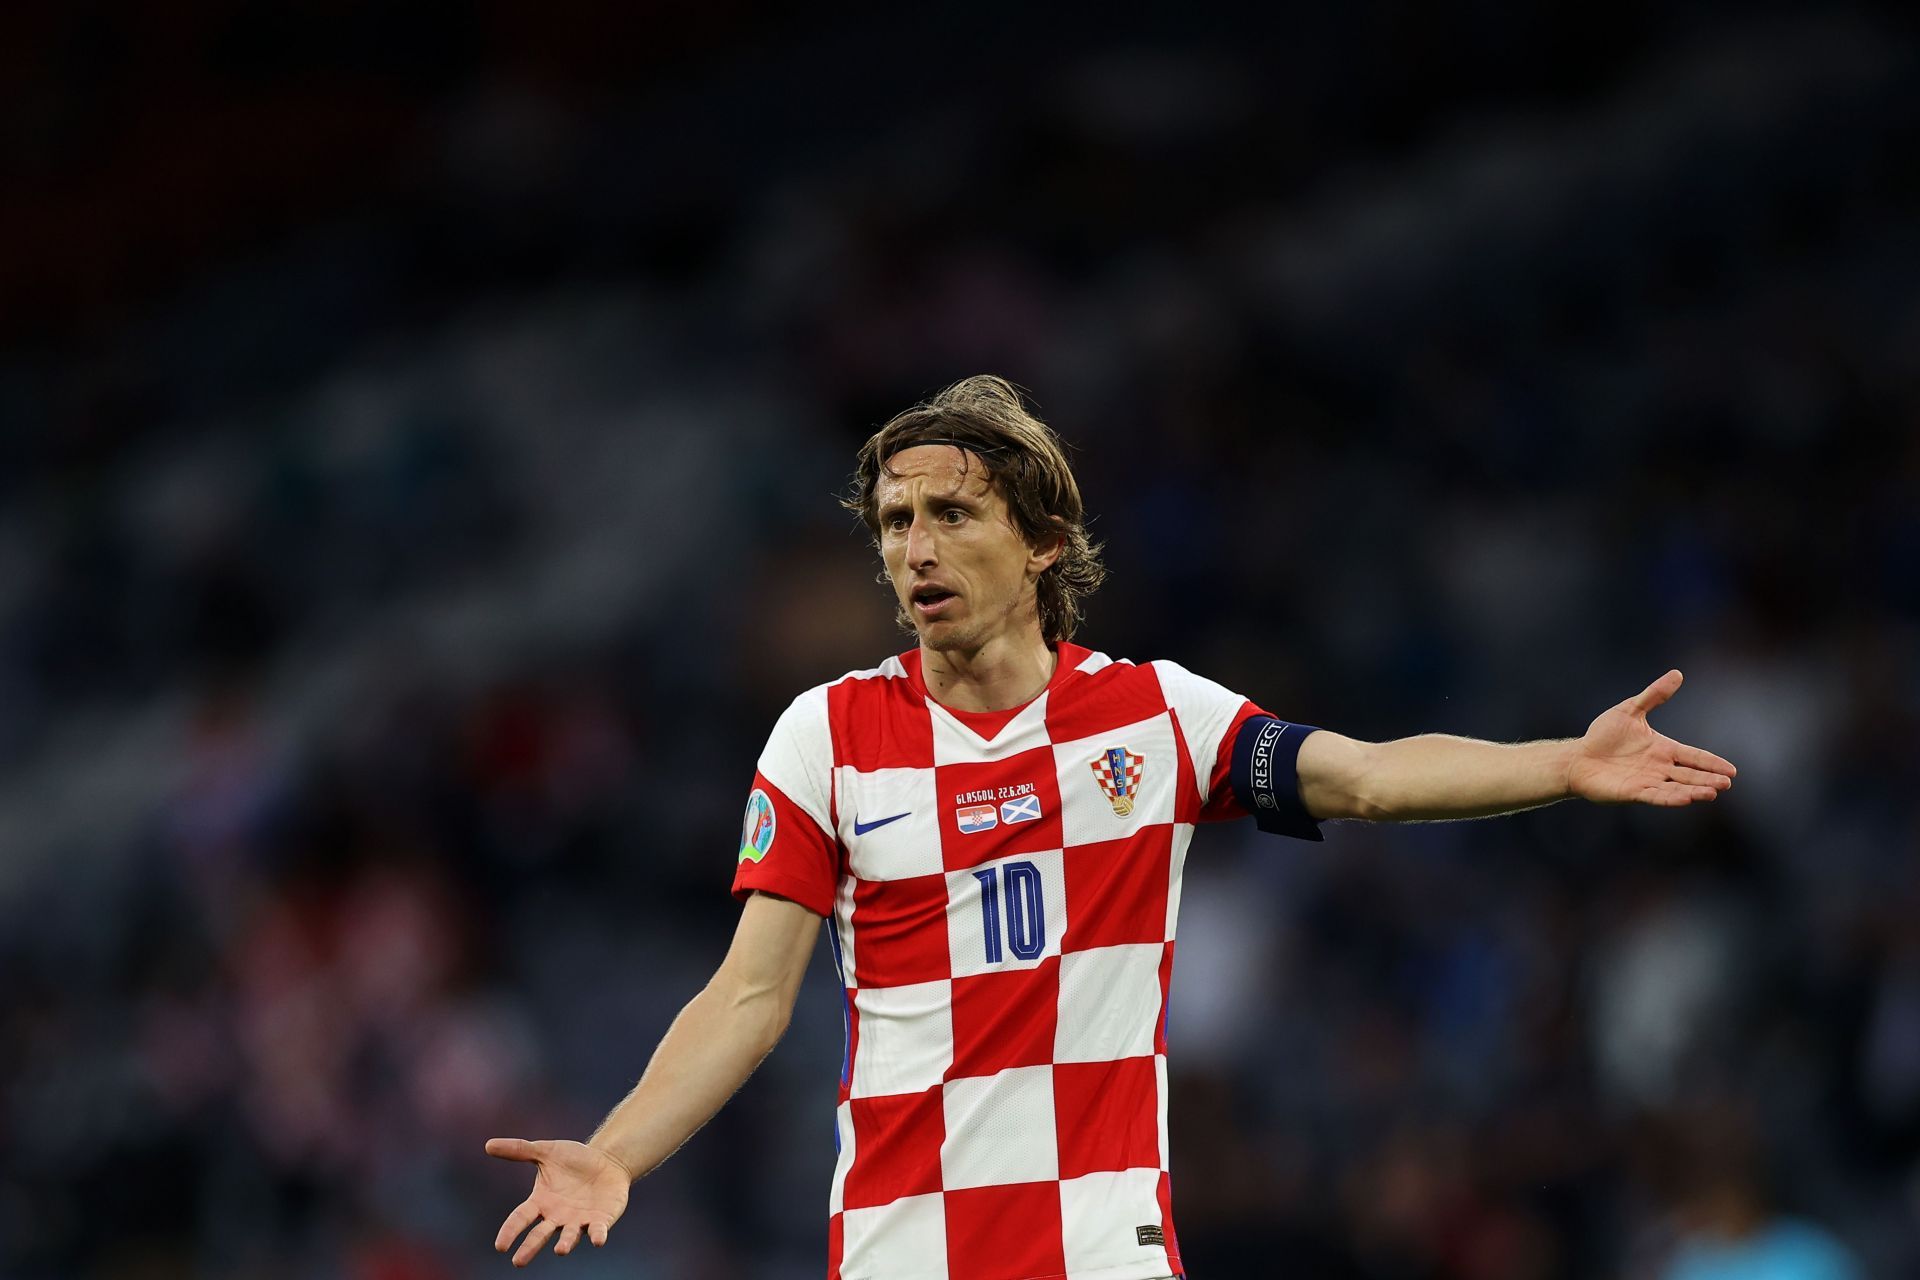 Luka Modric is among the greatest footballers not to have an international trophy to his name